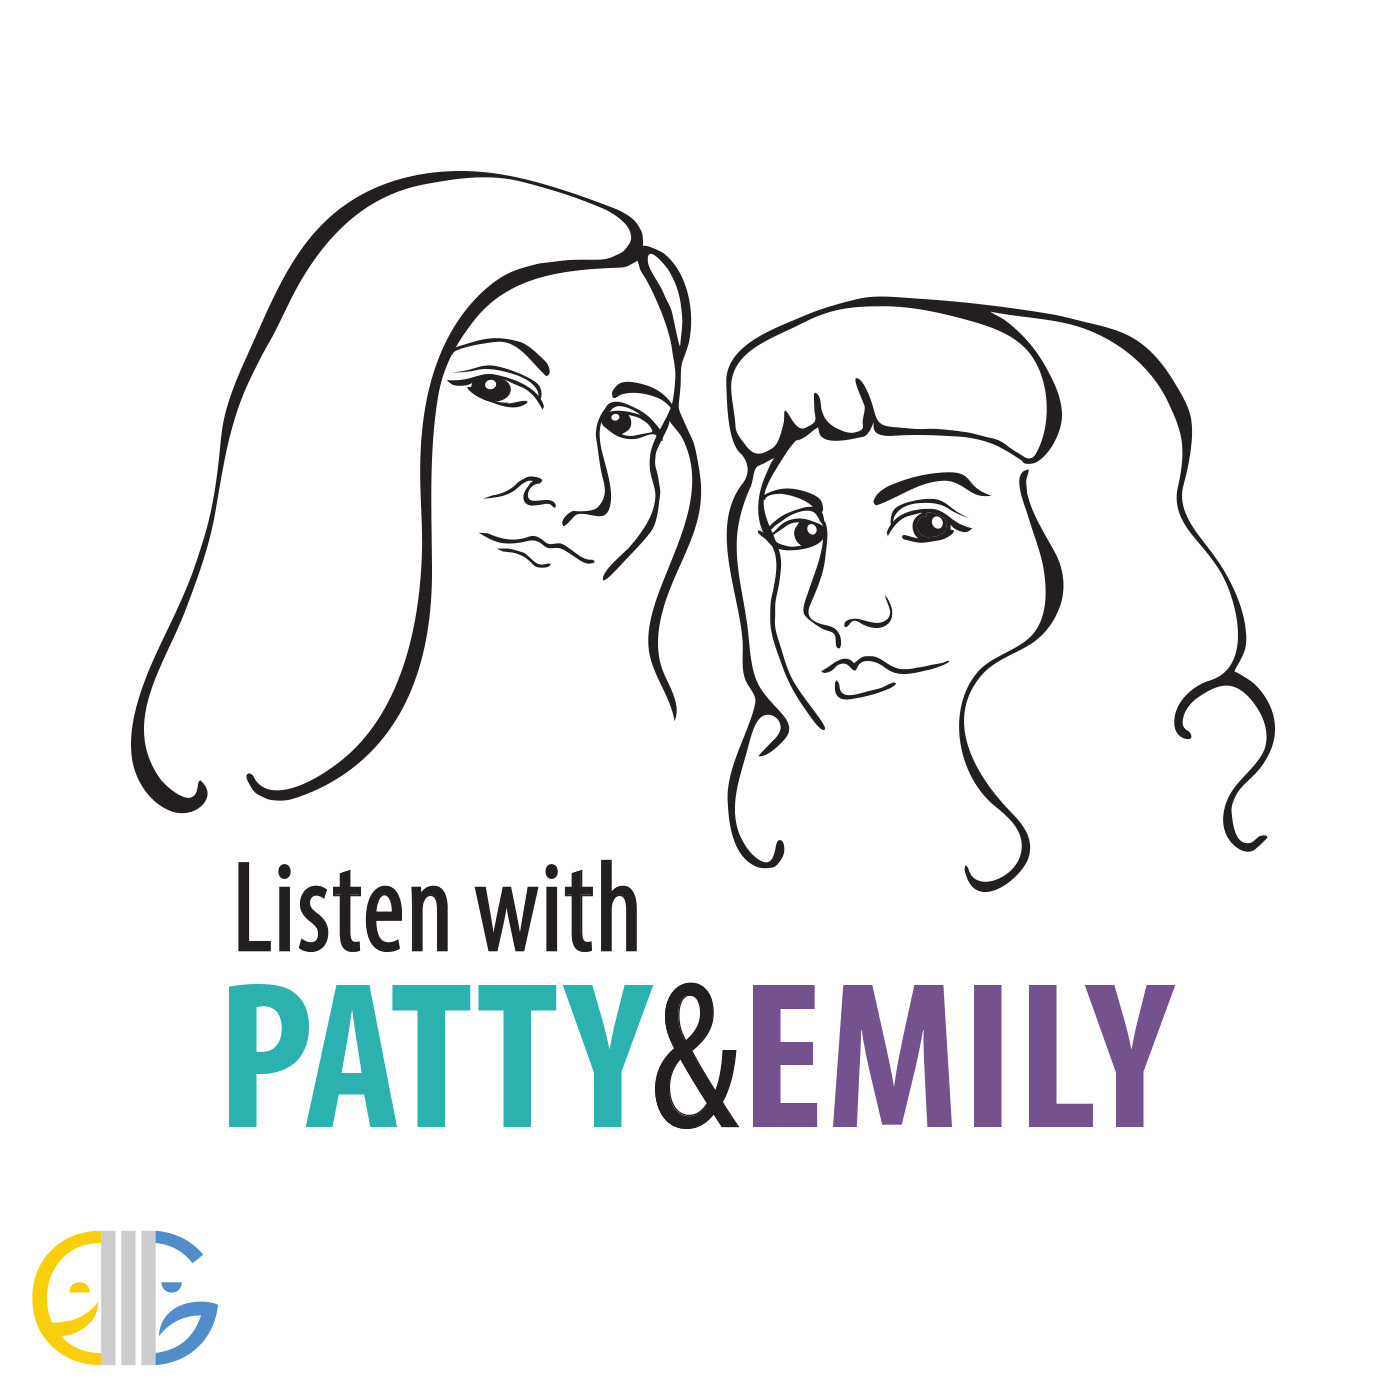 Listen with Patty & Emily